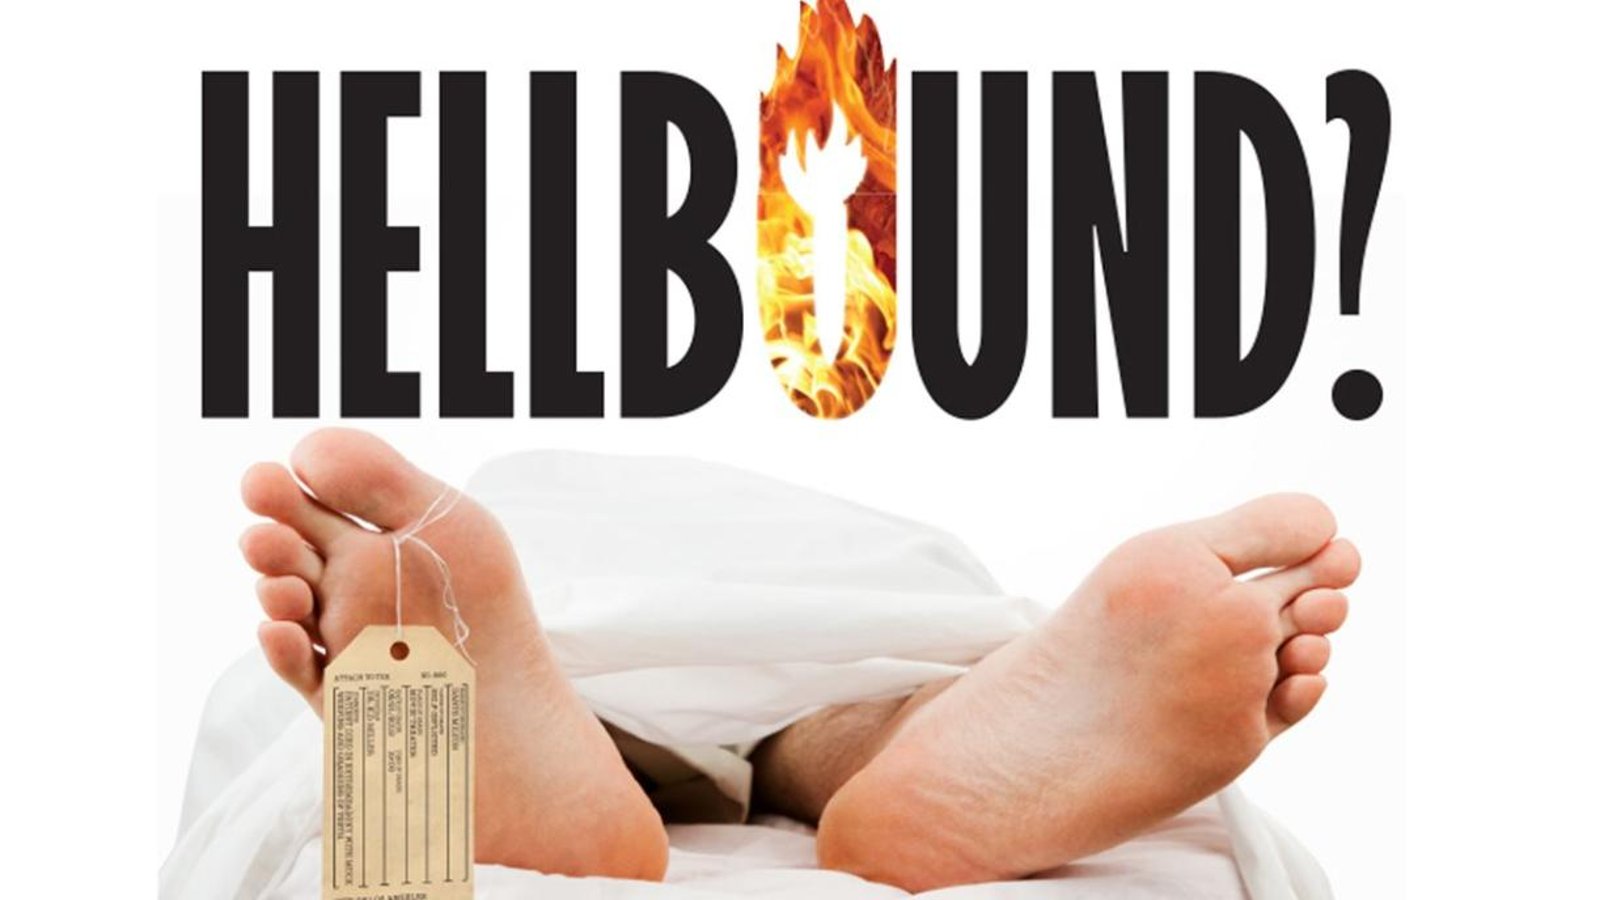 Hellbound? - Does Hell Exist?